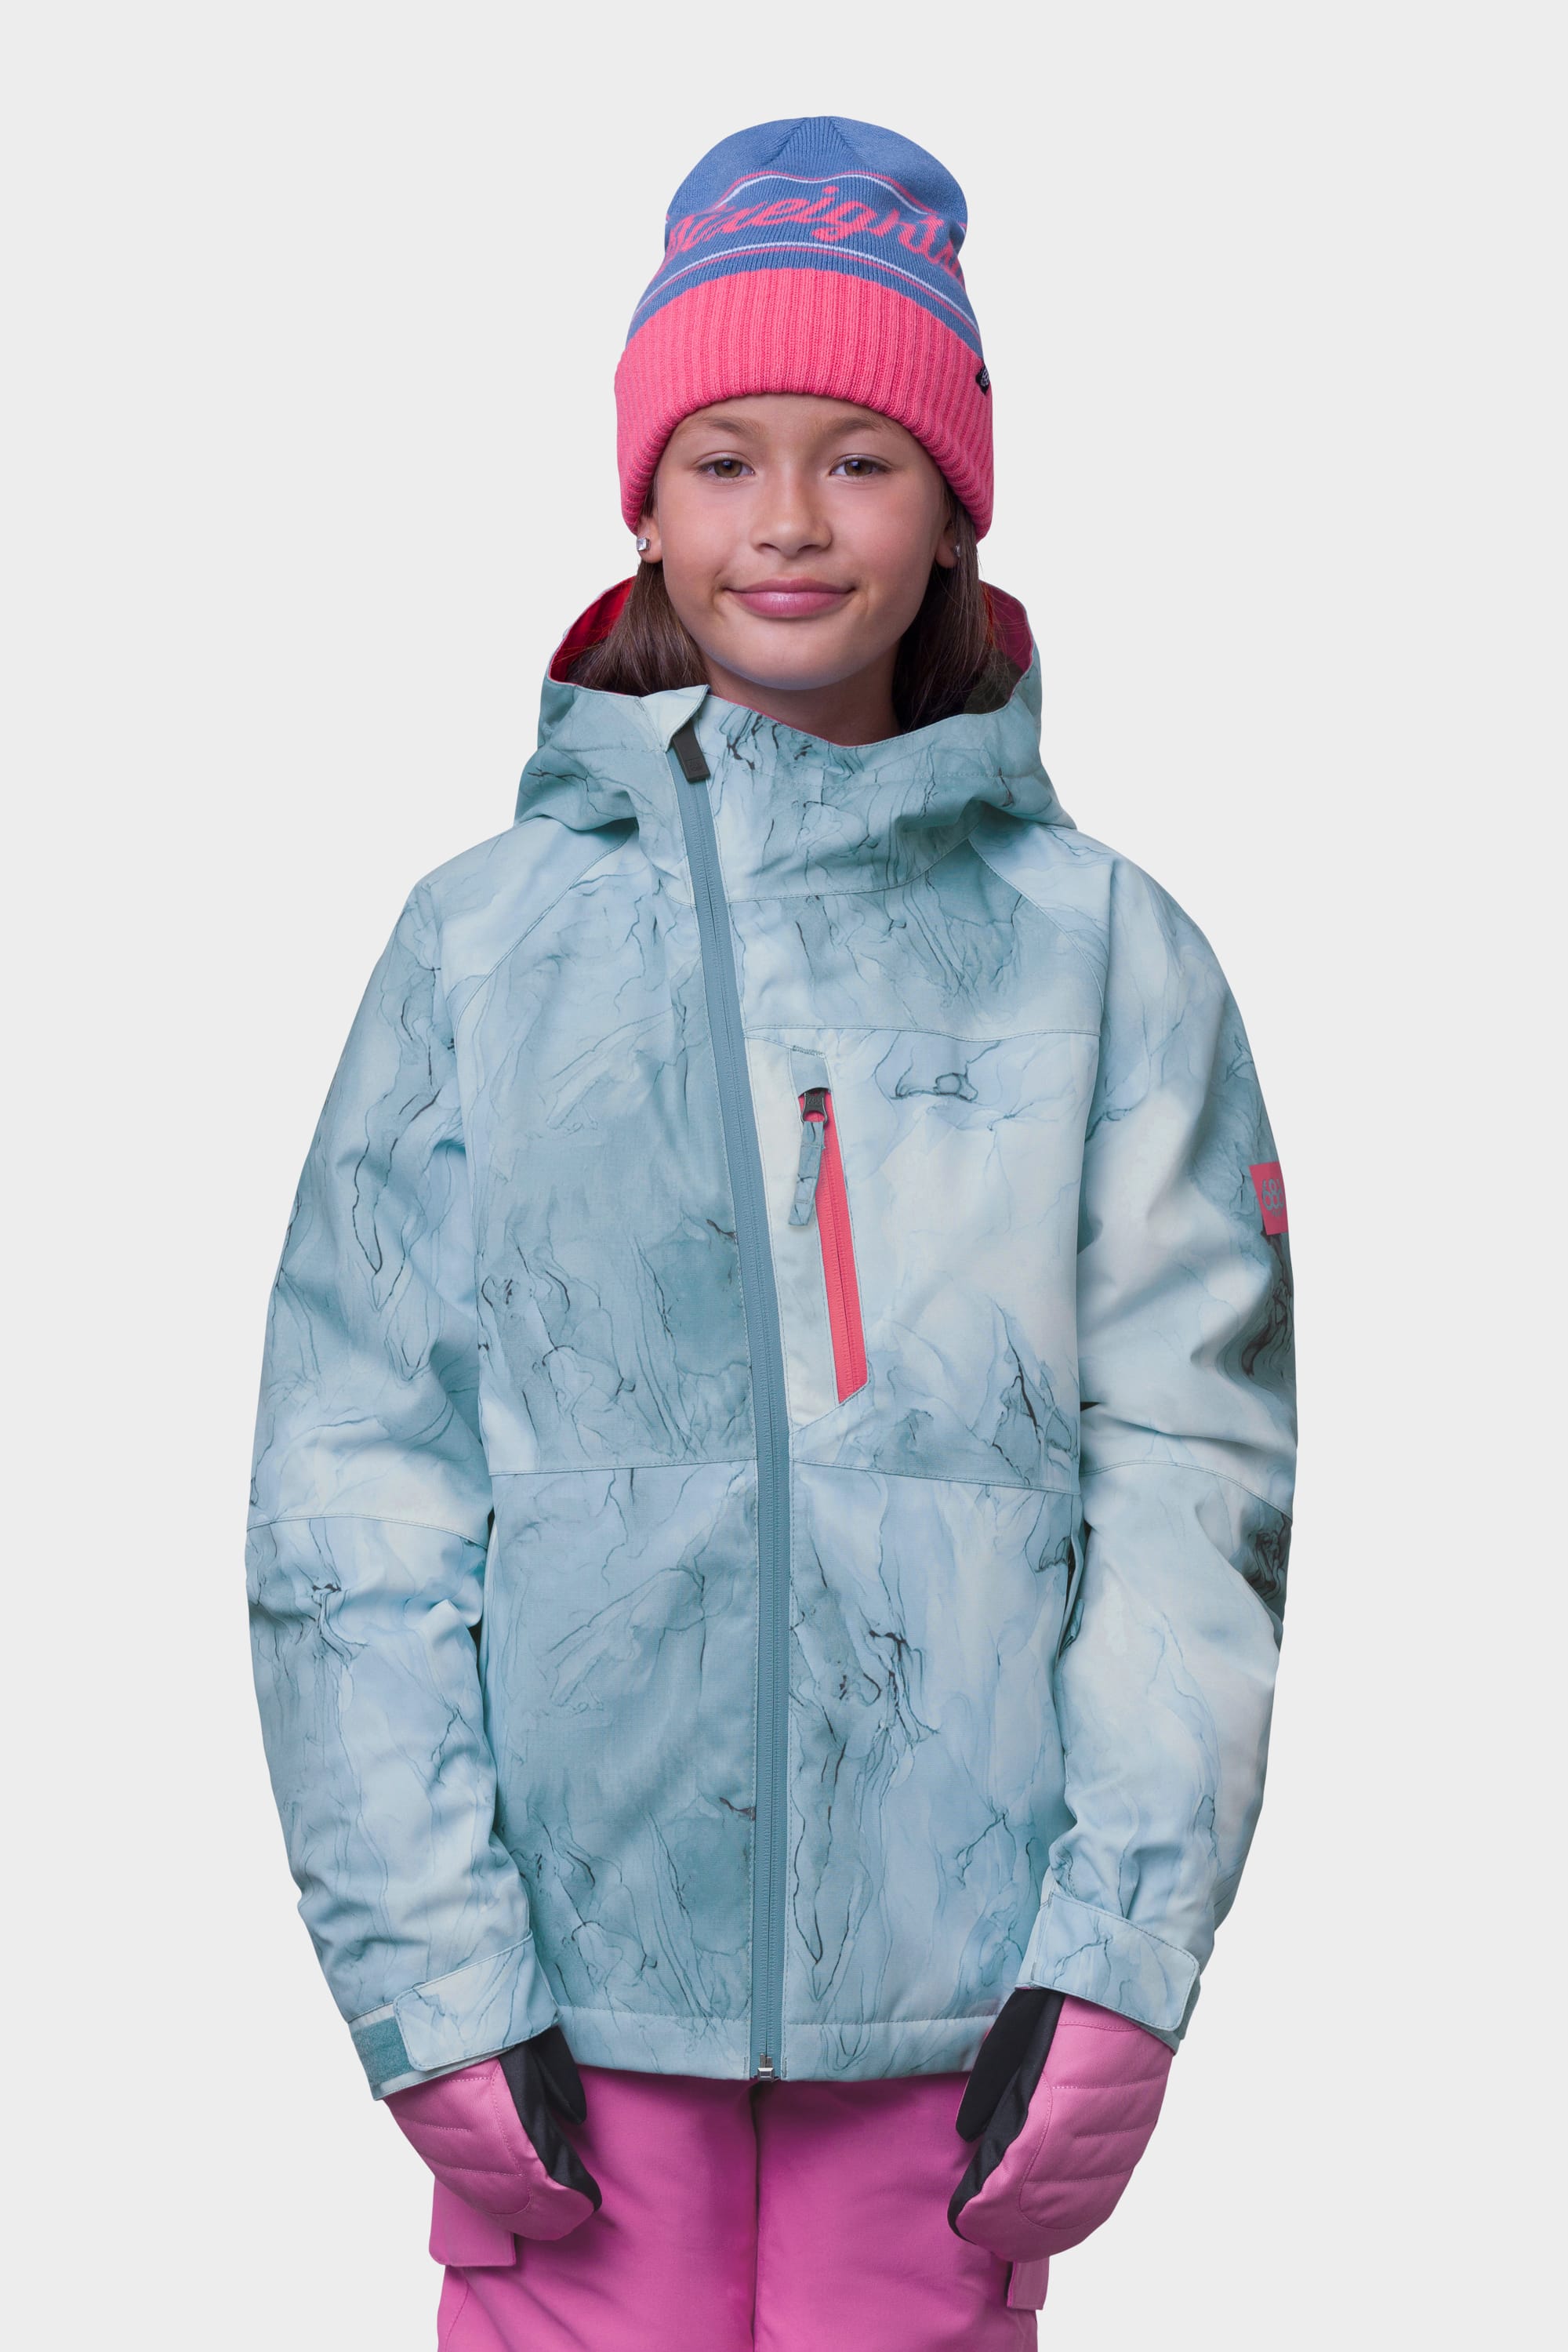 686 Technical Apparel | Youth Snow Jackets – 686.com